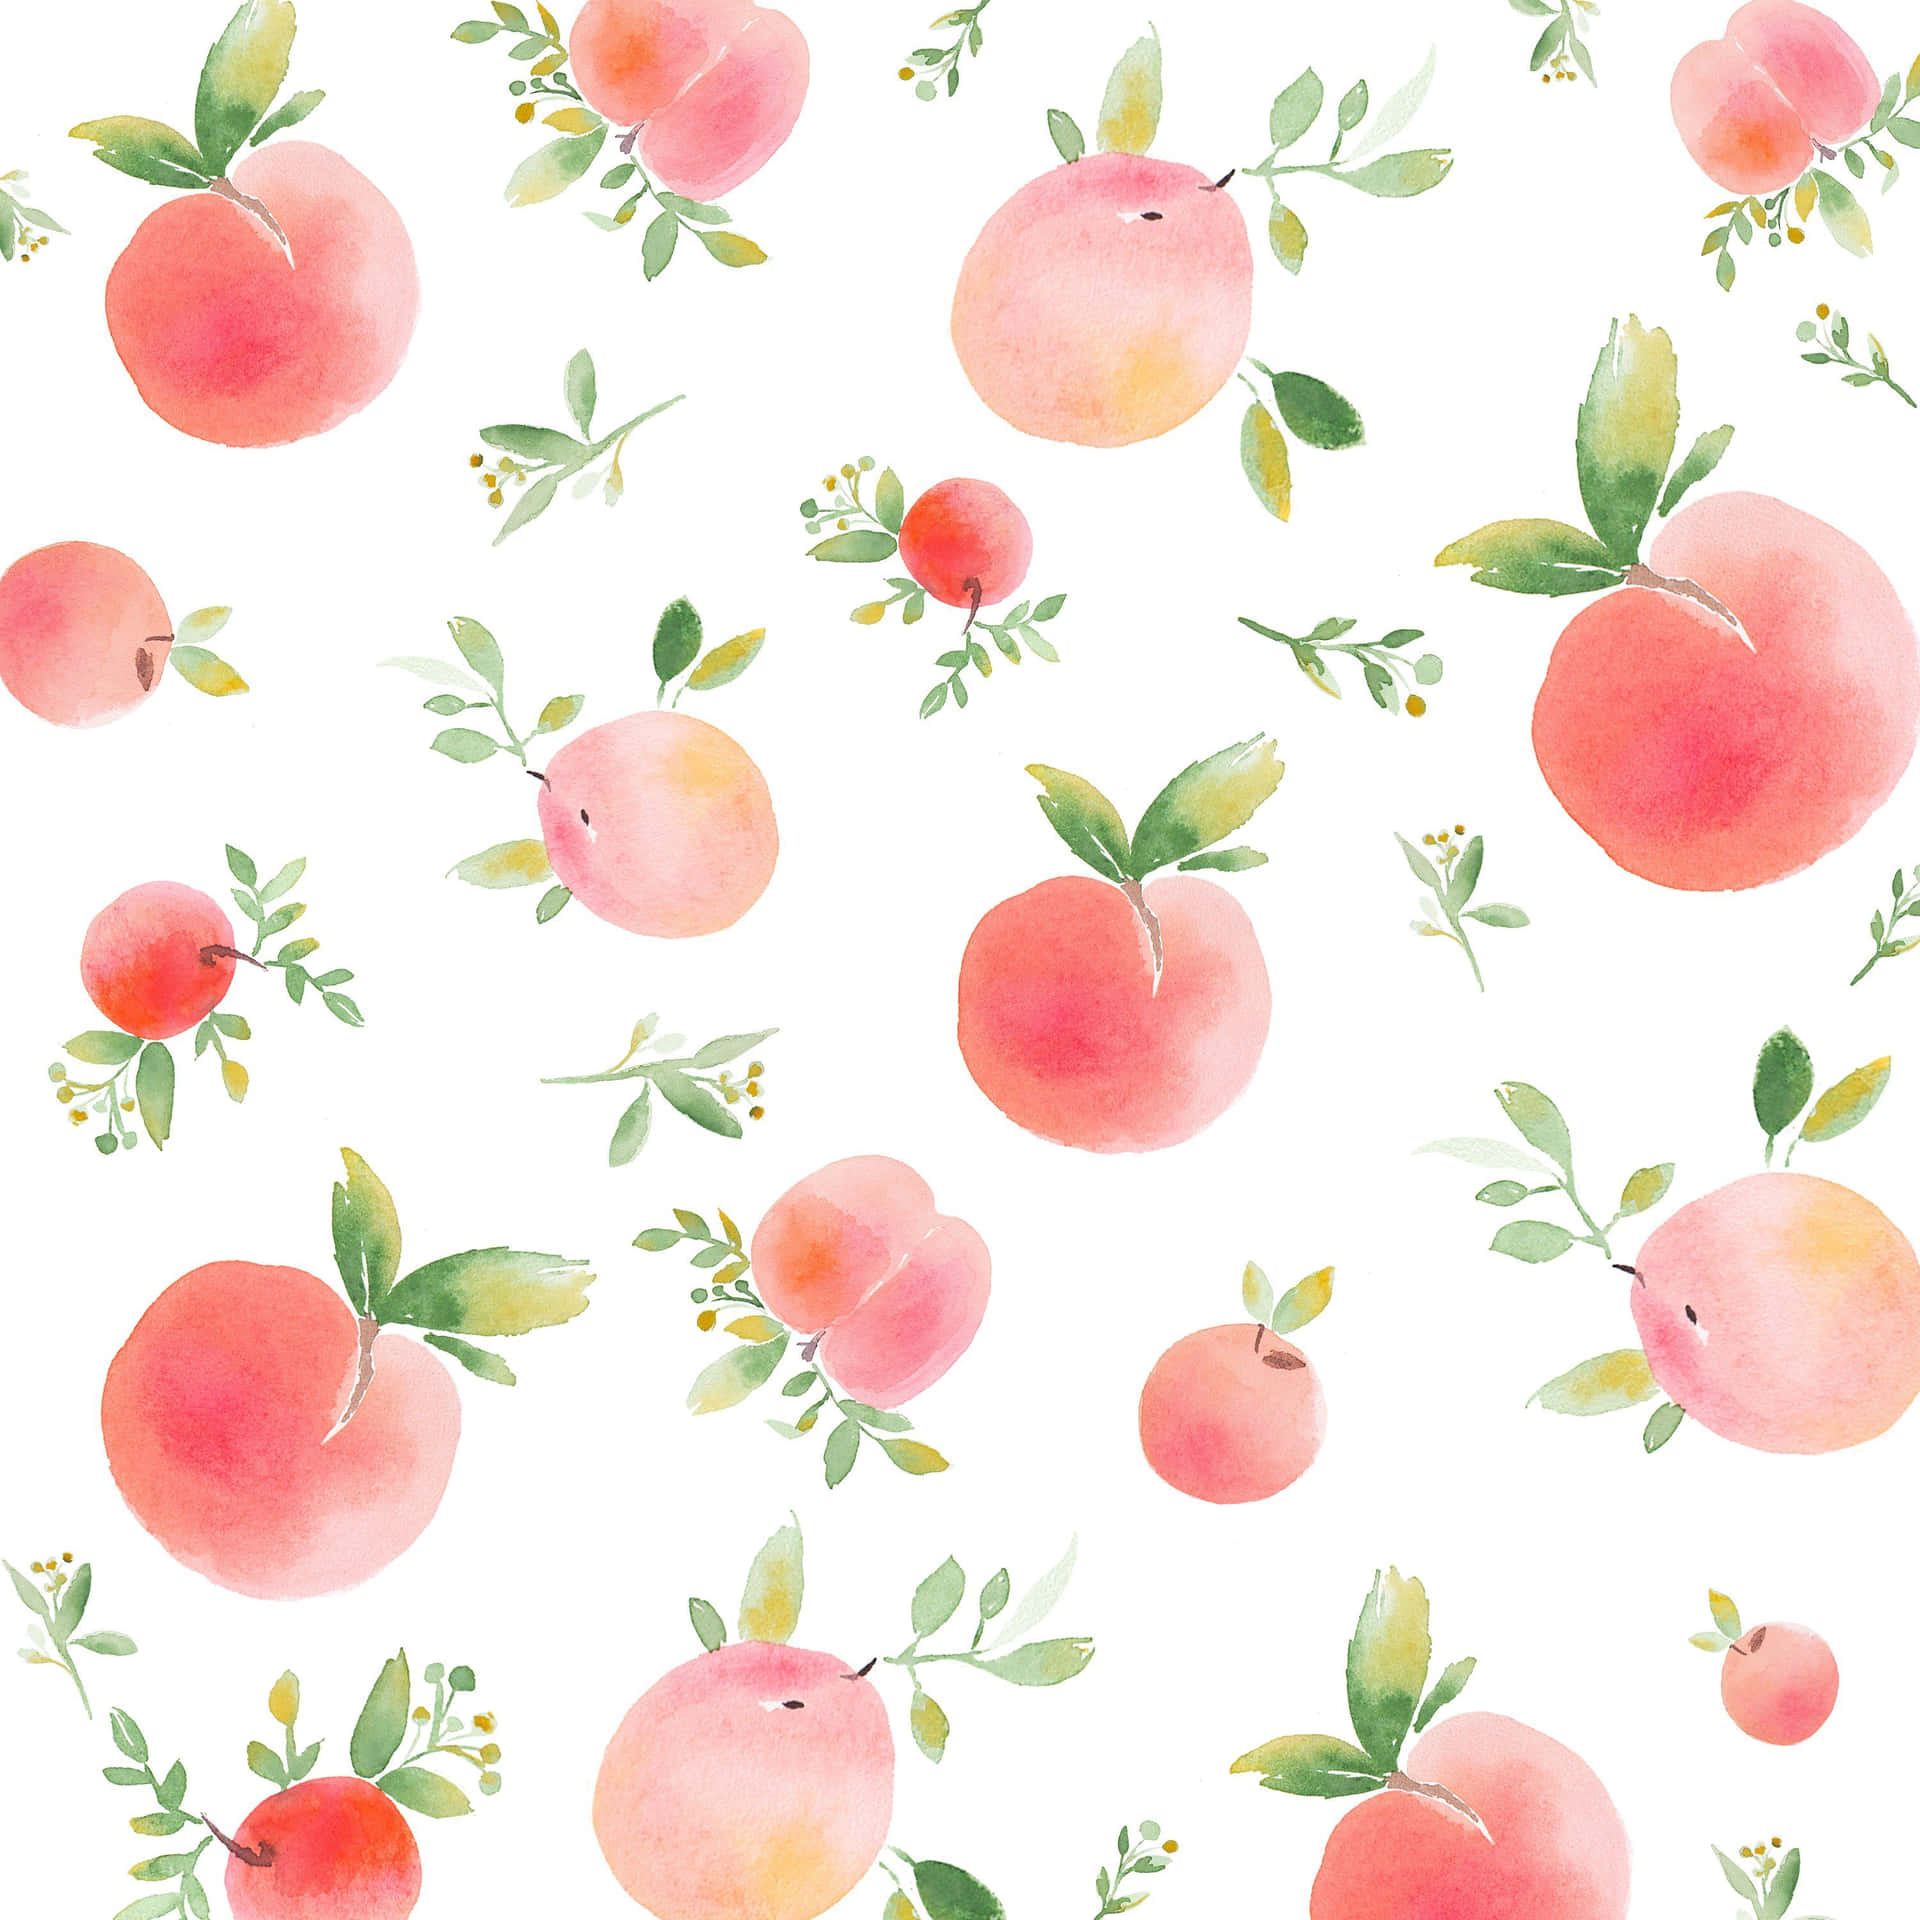 Summer will be delicious with an abundance of gorgeous peaches!